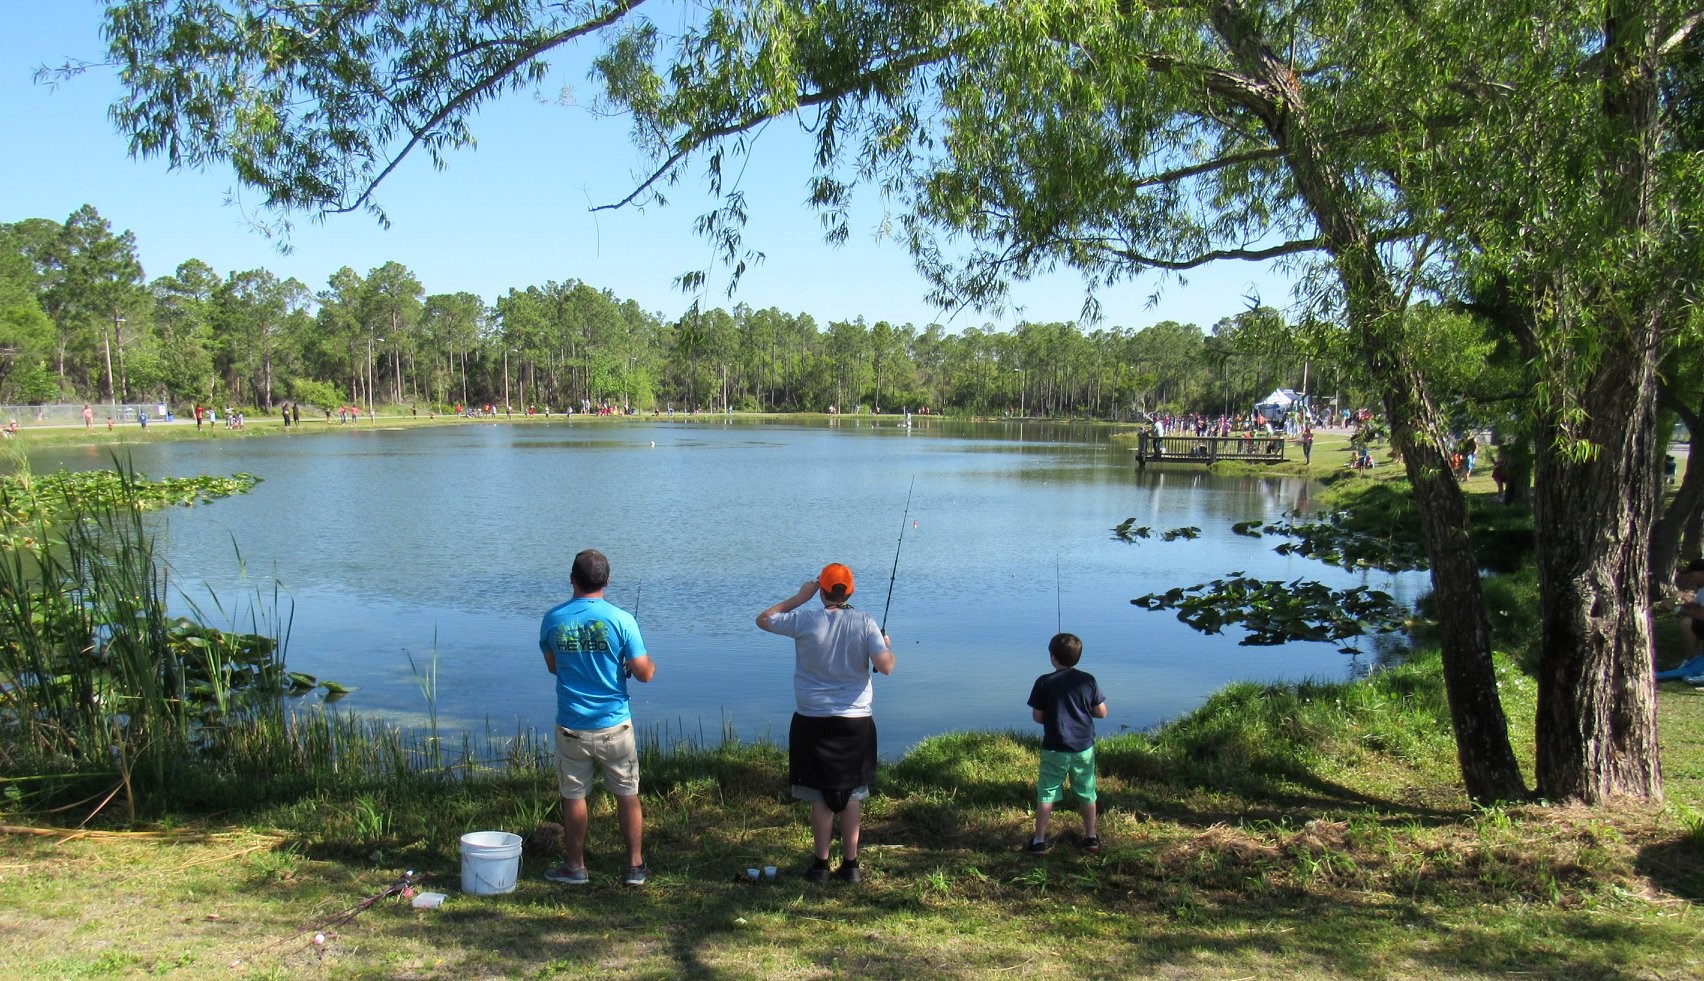 Kids fishing at the Youth Fishing Pond with trees and grass around